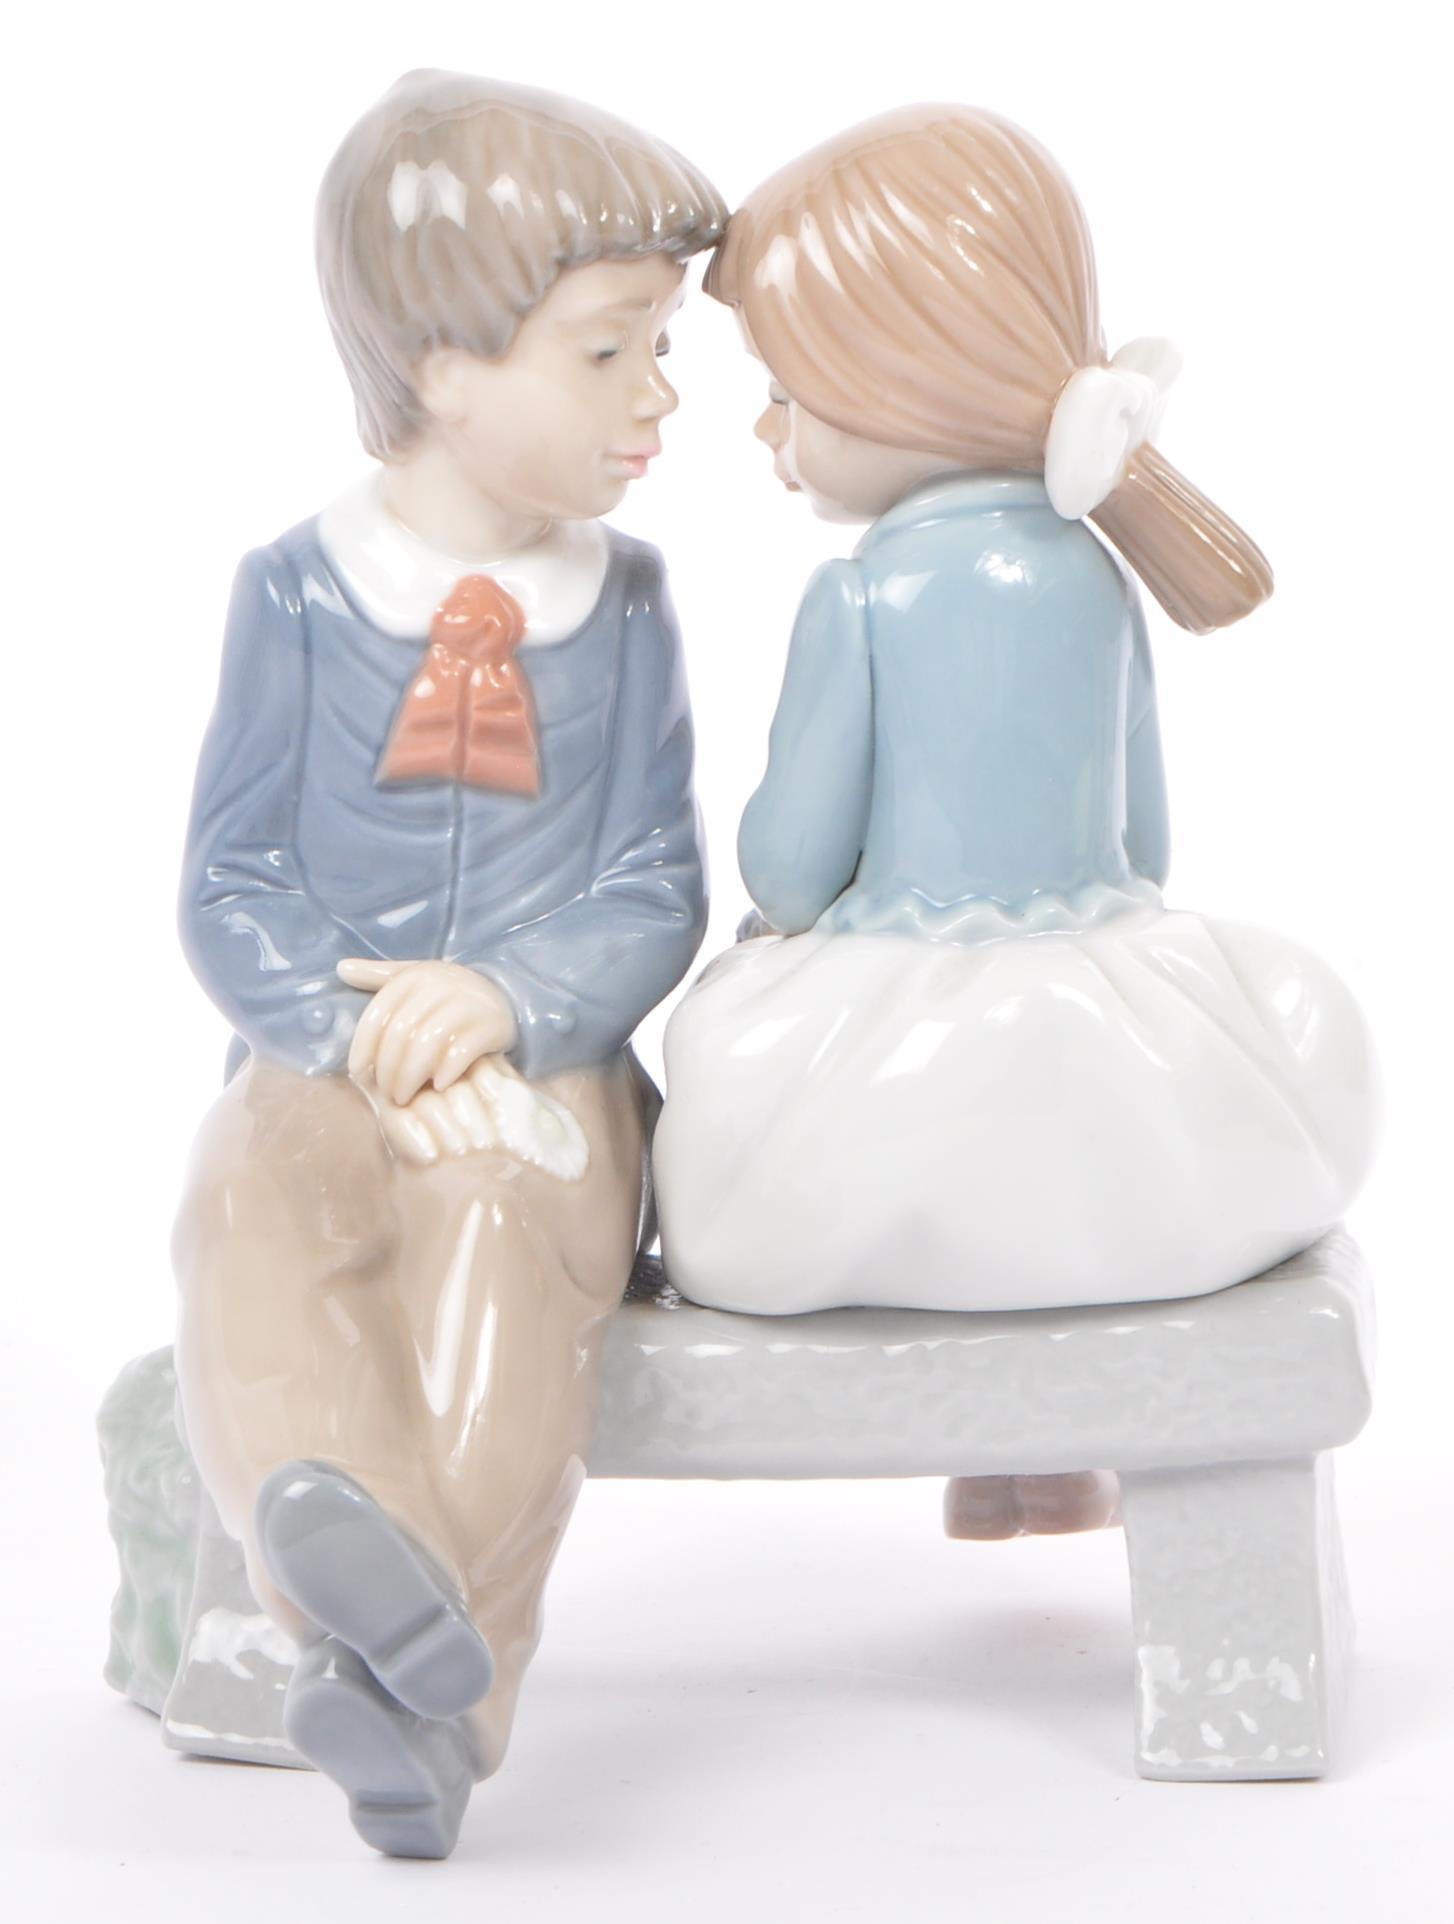 COLLECTION OF NAO SPANISH PORCELAIN FIGURINES - Image 7 of 9